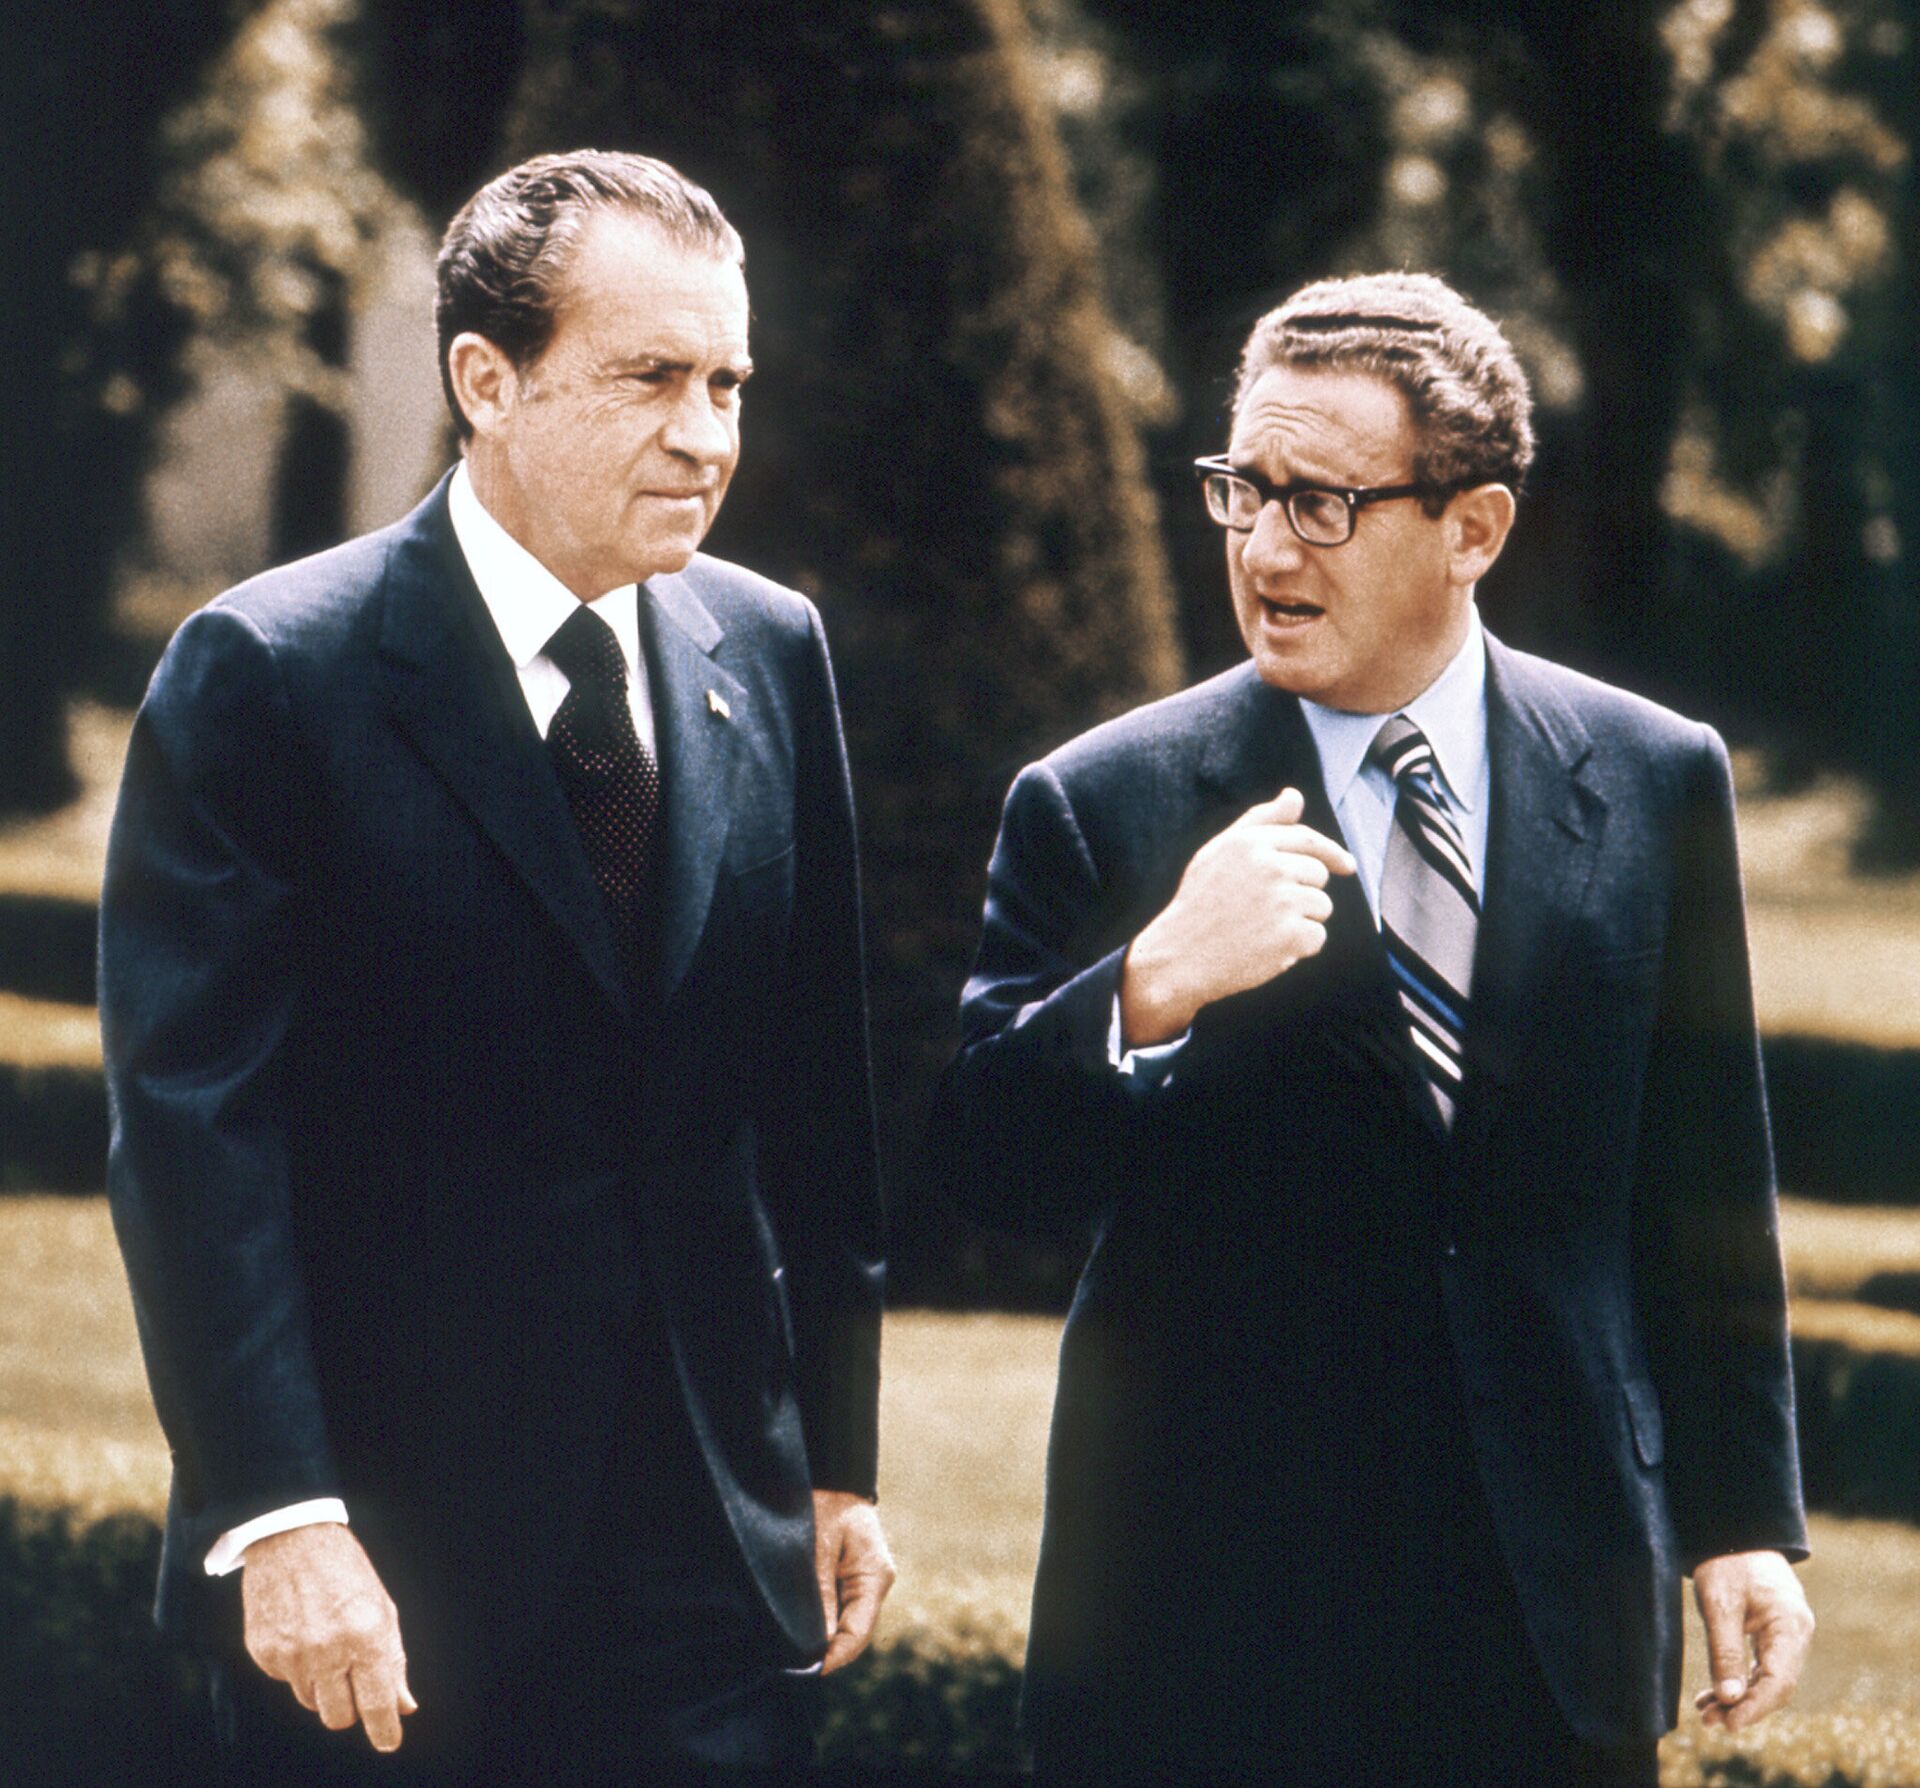 US Special Advisor Henry Kissinger (D) with President Richard Nixon in May 1972 in Vienna. (File) - Sputnik India, 1920, 26.05.2023